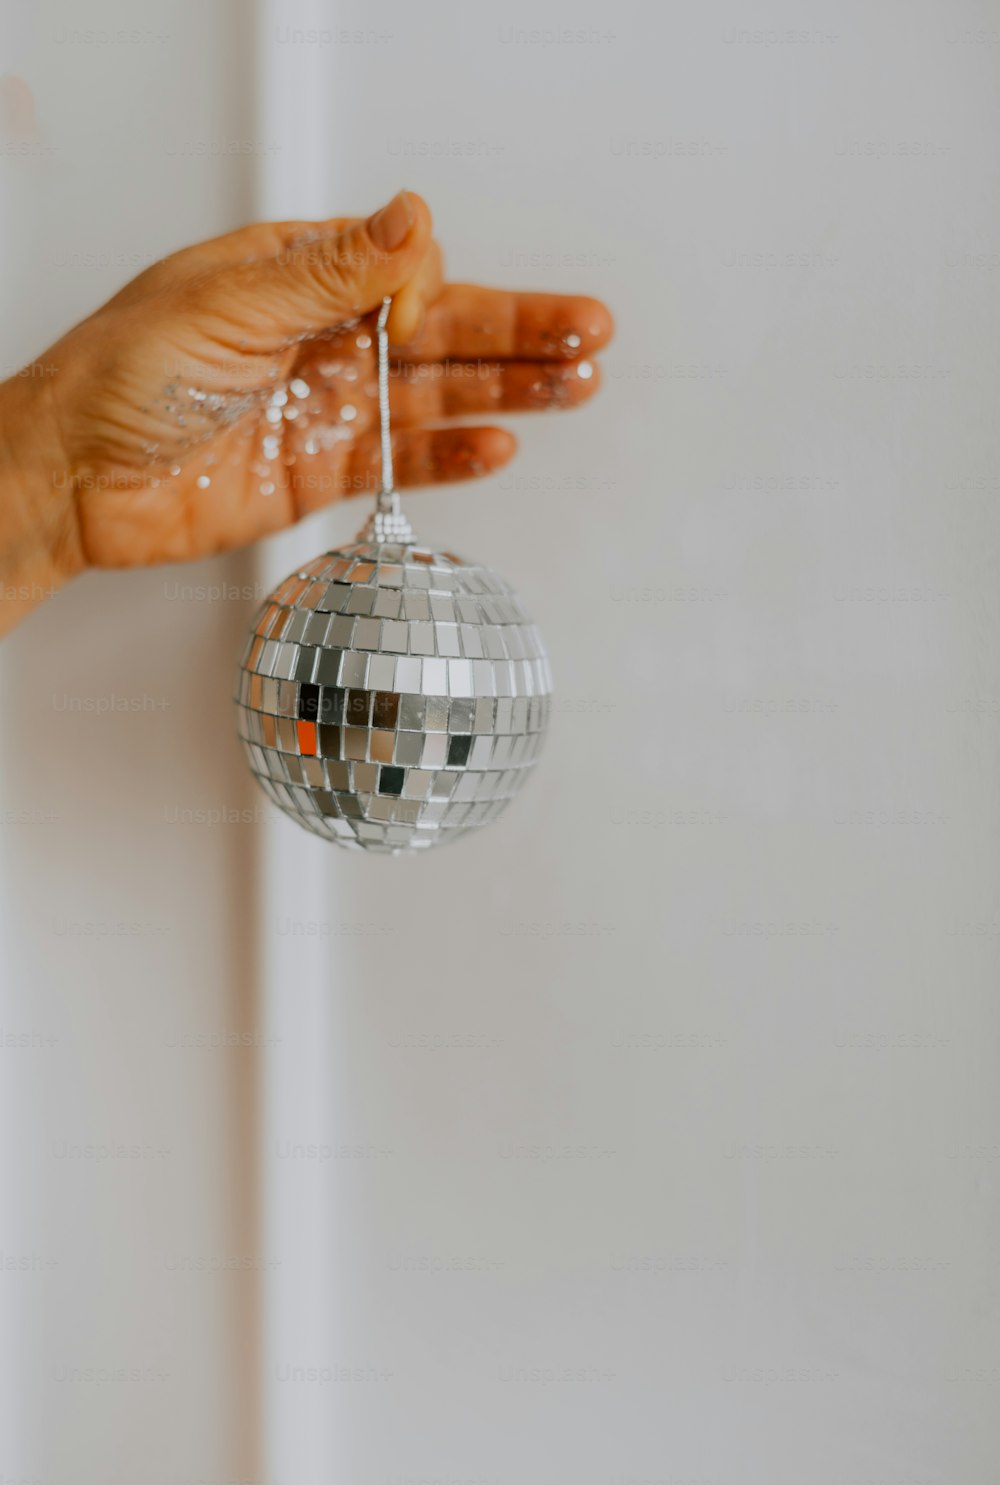 a person's hand holding a disco ball ornament